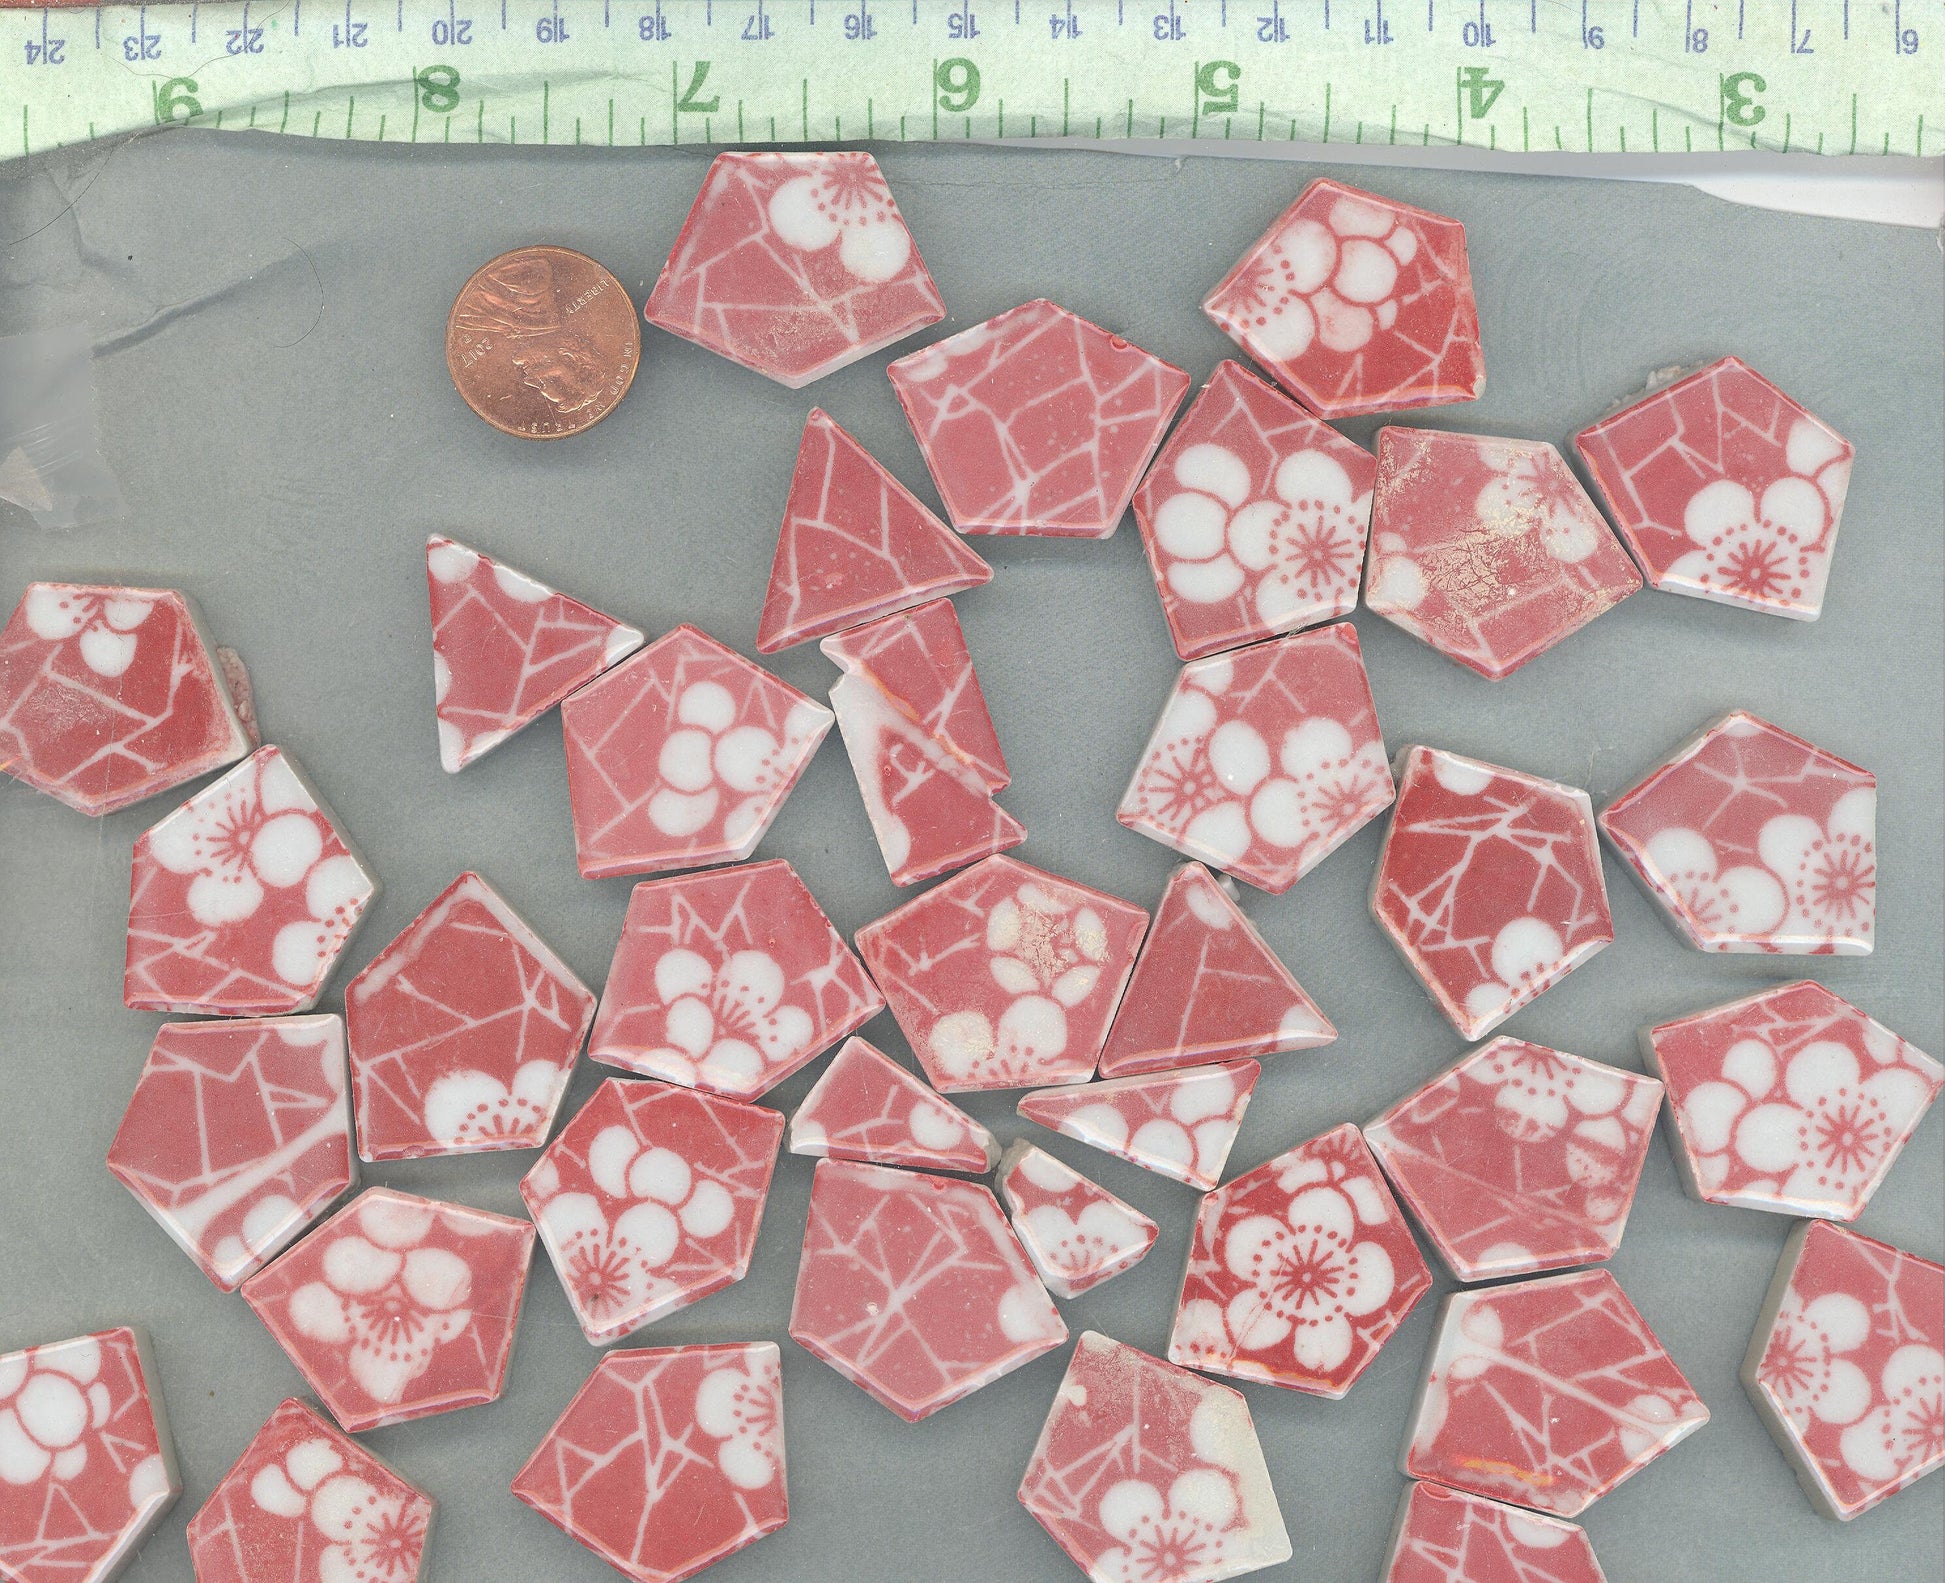 Red with White Flowers - Chunky Mosaic Tiles in Assorted Puzzle Sizes - Half Pound